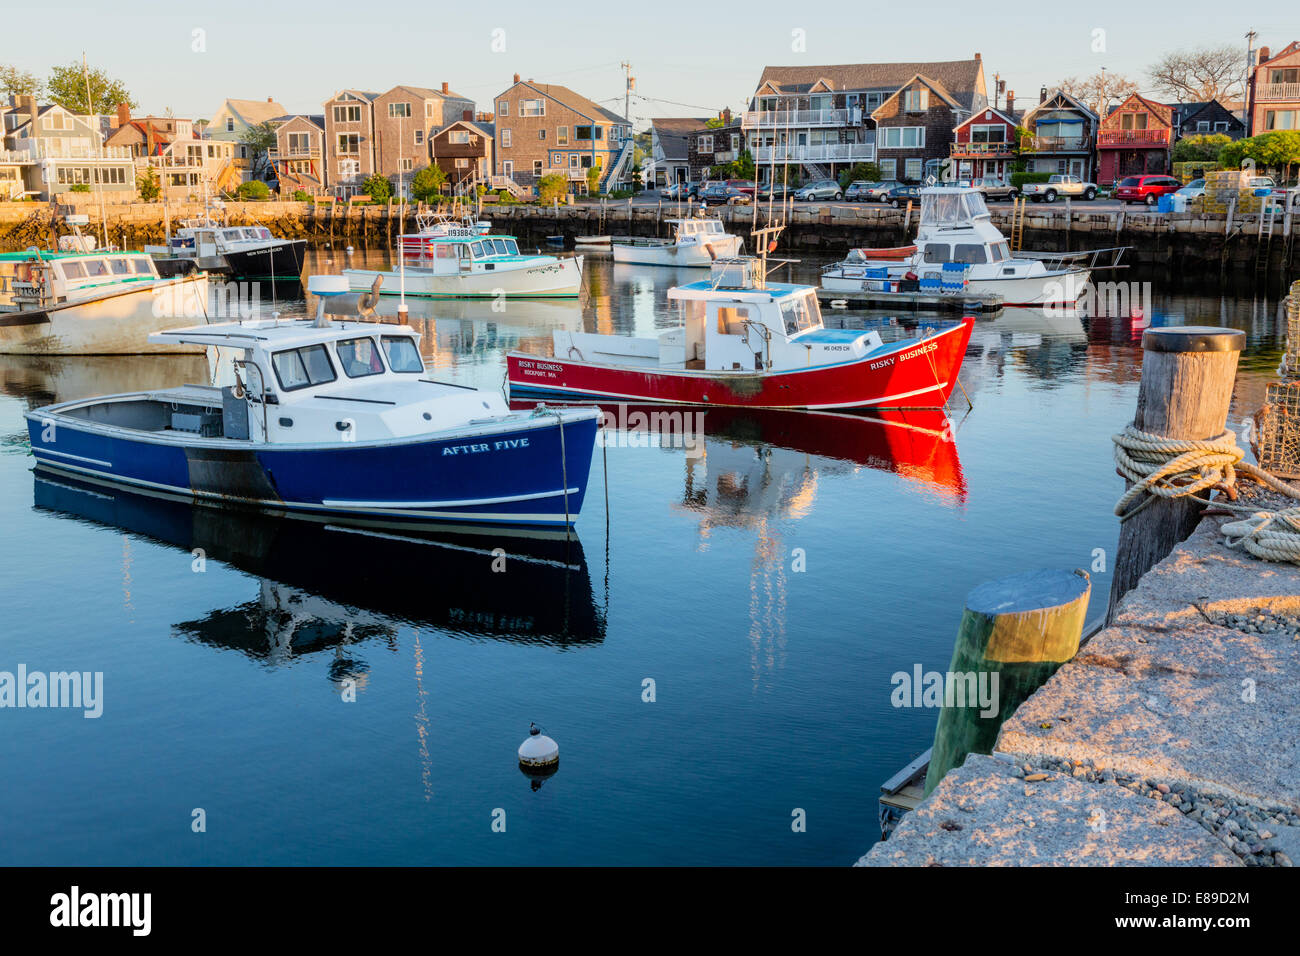 Risky Business and After Five fishing boats docked at Bradley Wharf in Rockland, Massachusetts at sunrise. Stock Photo